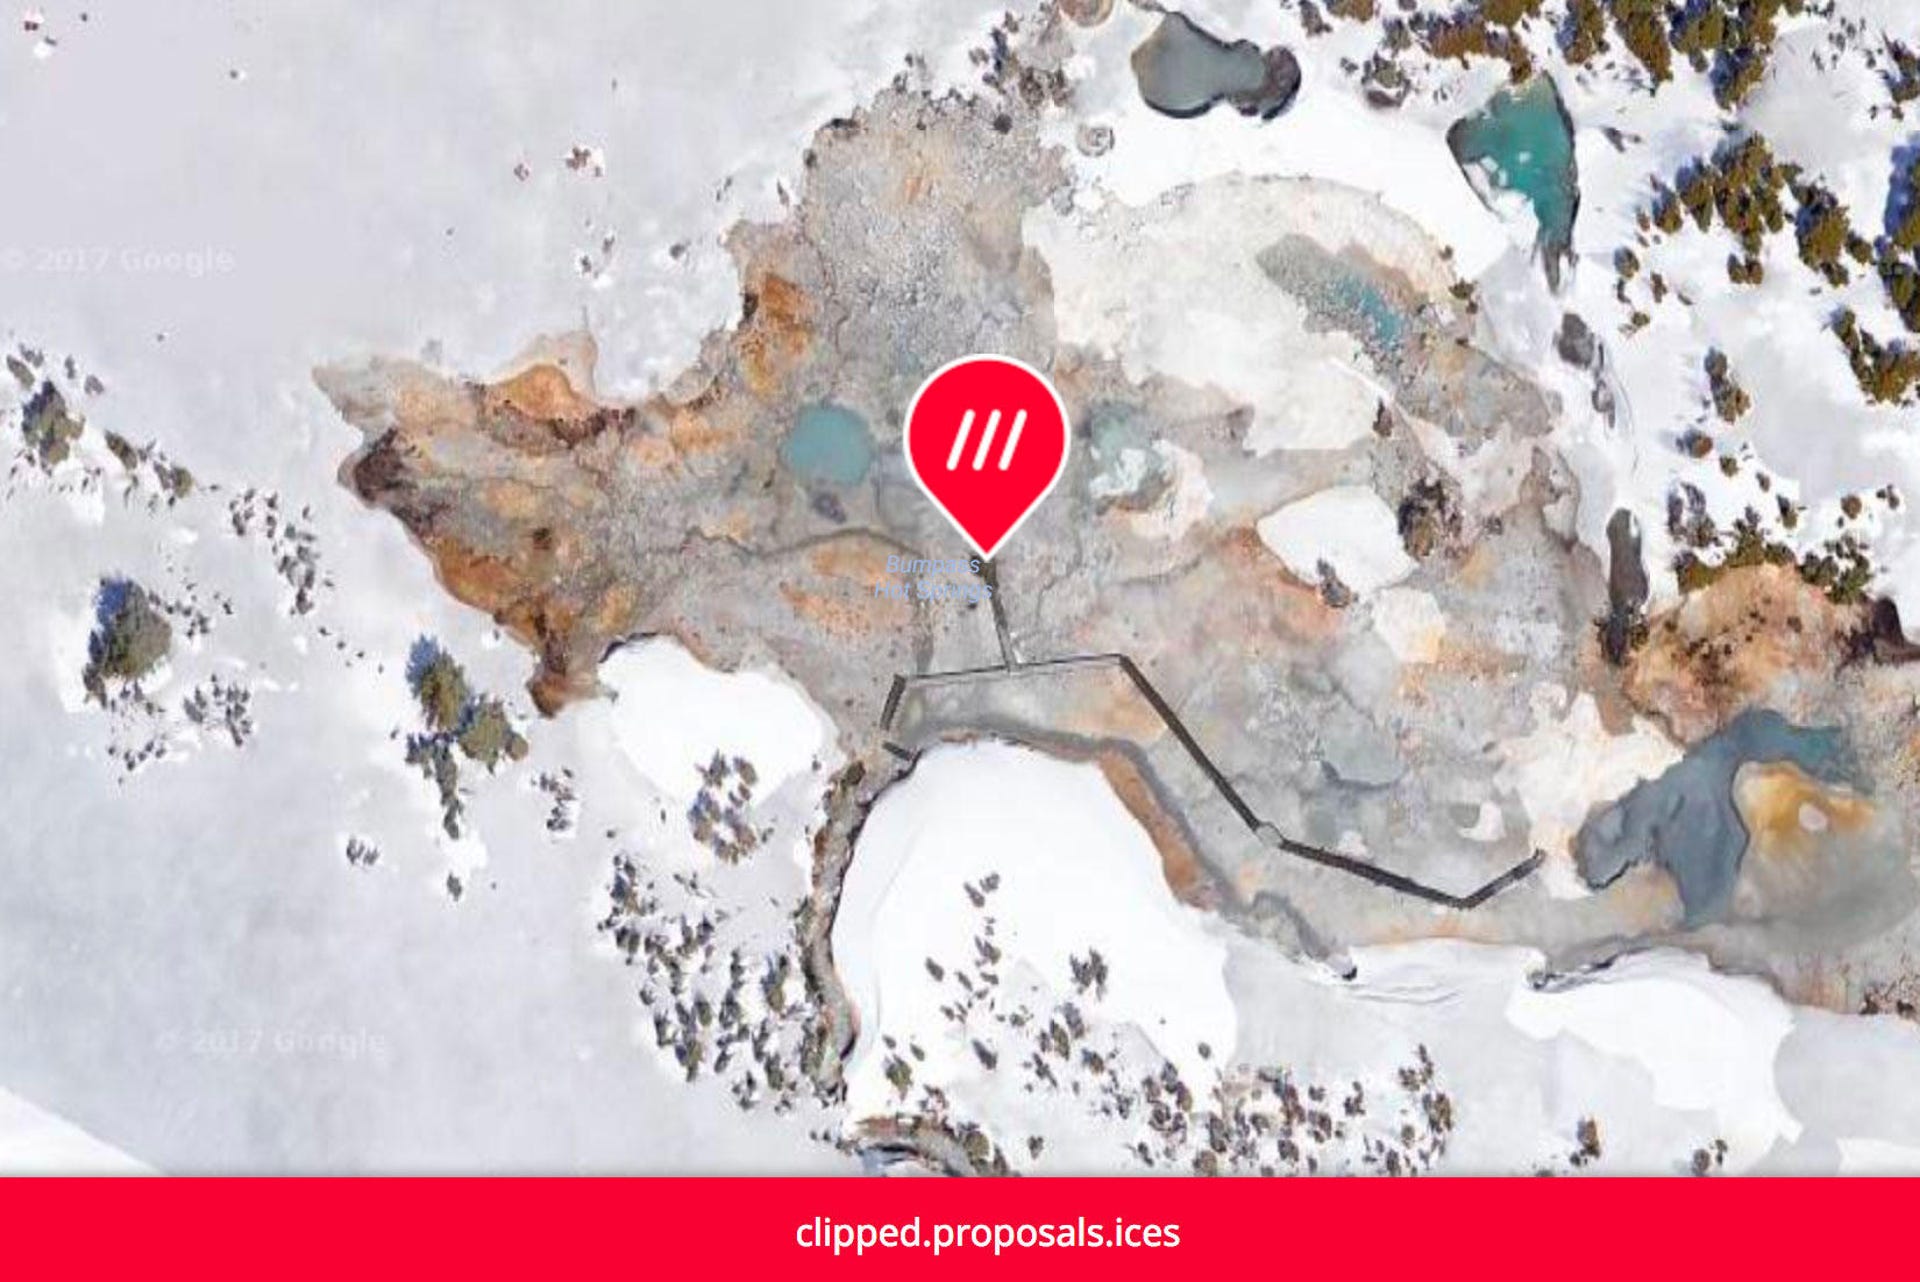 The What3words service can be used to give a precise location for difficult-to-describe spots like the hot springs viewing area at Bumpass Hell in Lassen Volcanic National Park: 